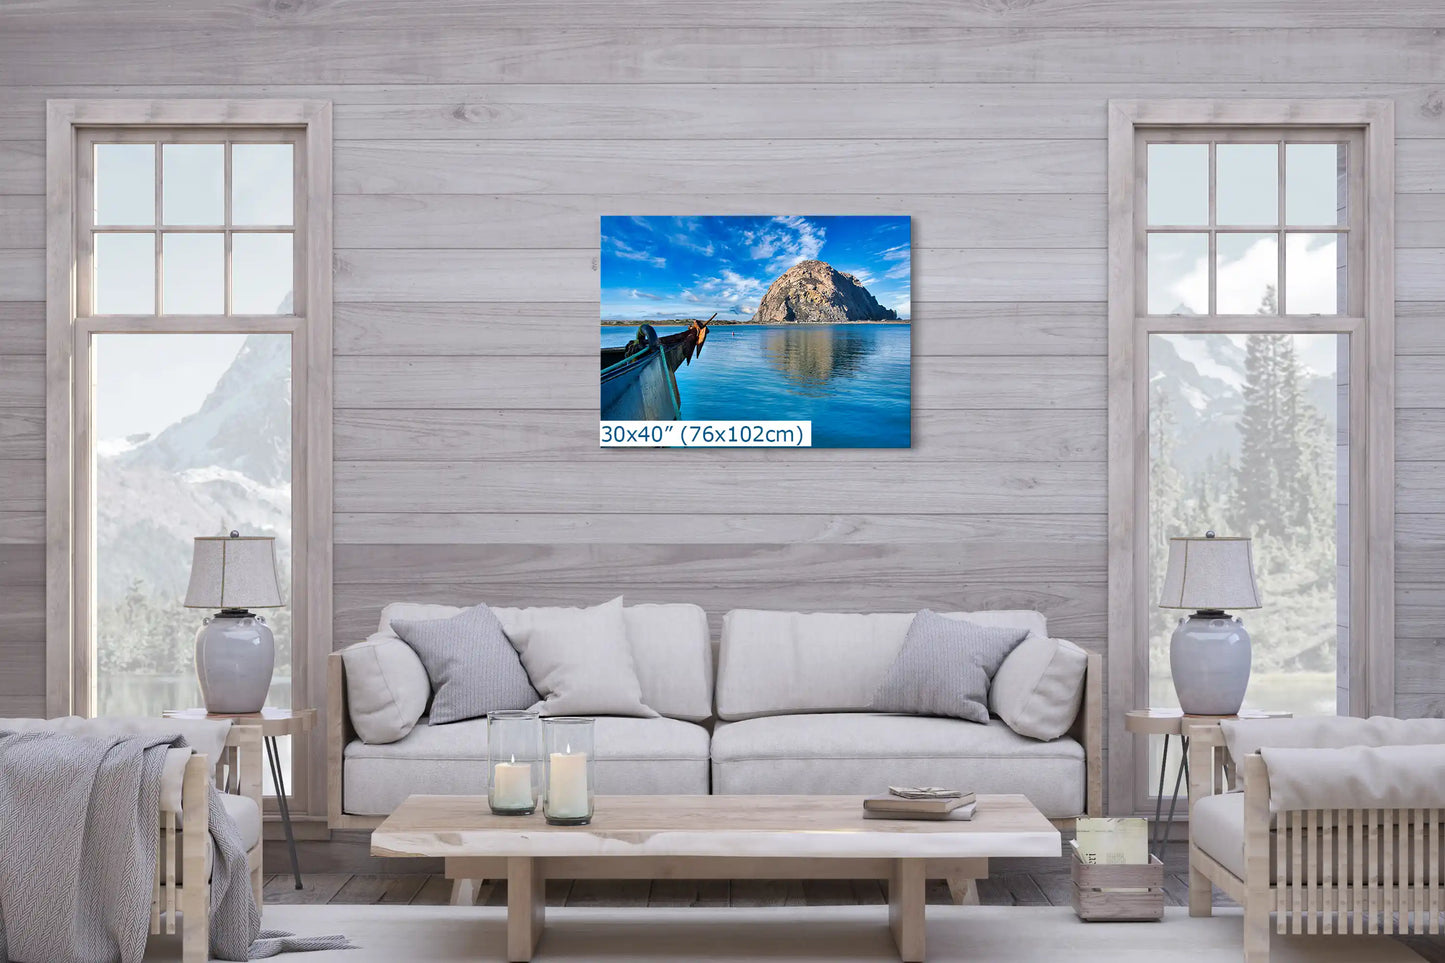 A 30x40 canvas art piece in a living room, with the bow of a boat leading the eye to the majestic Morro Rock, symbolizing serene navigation.